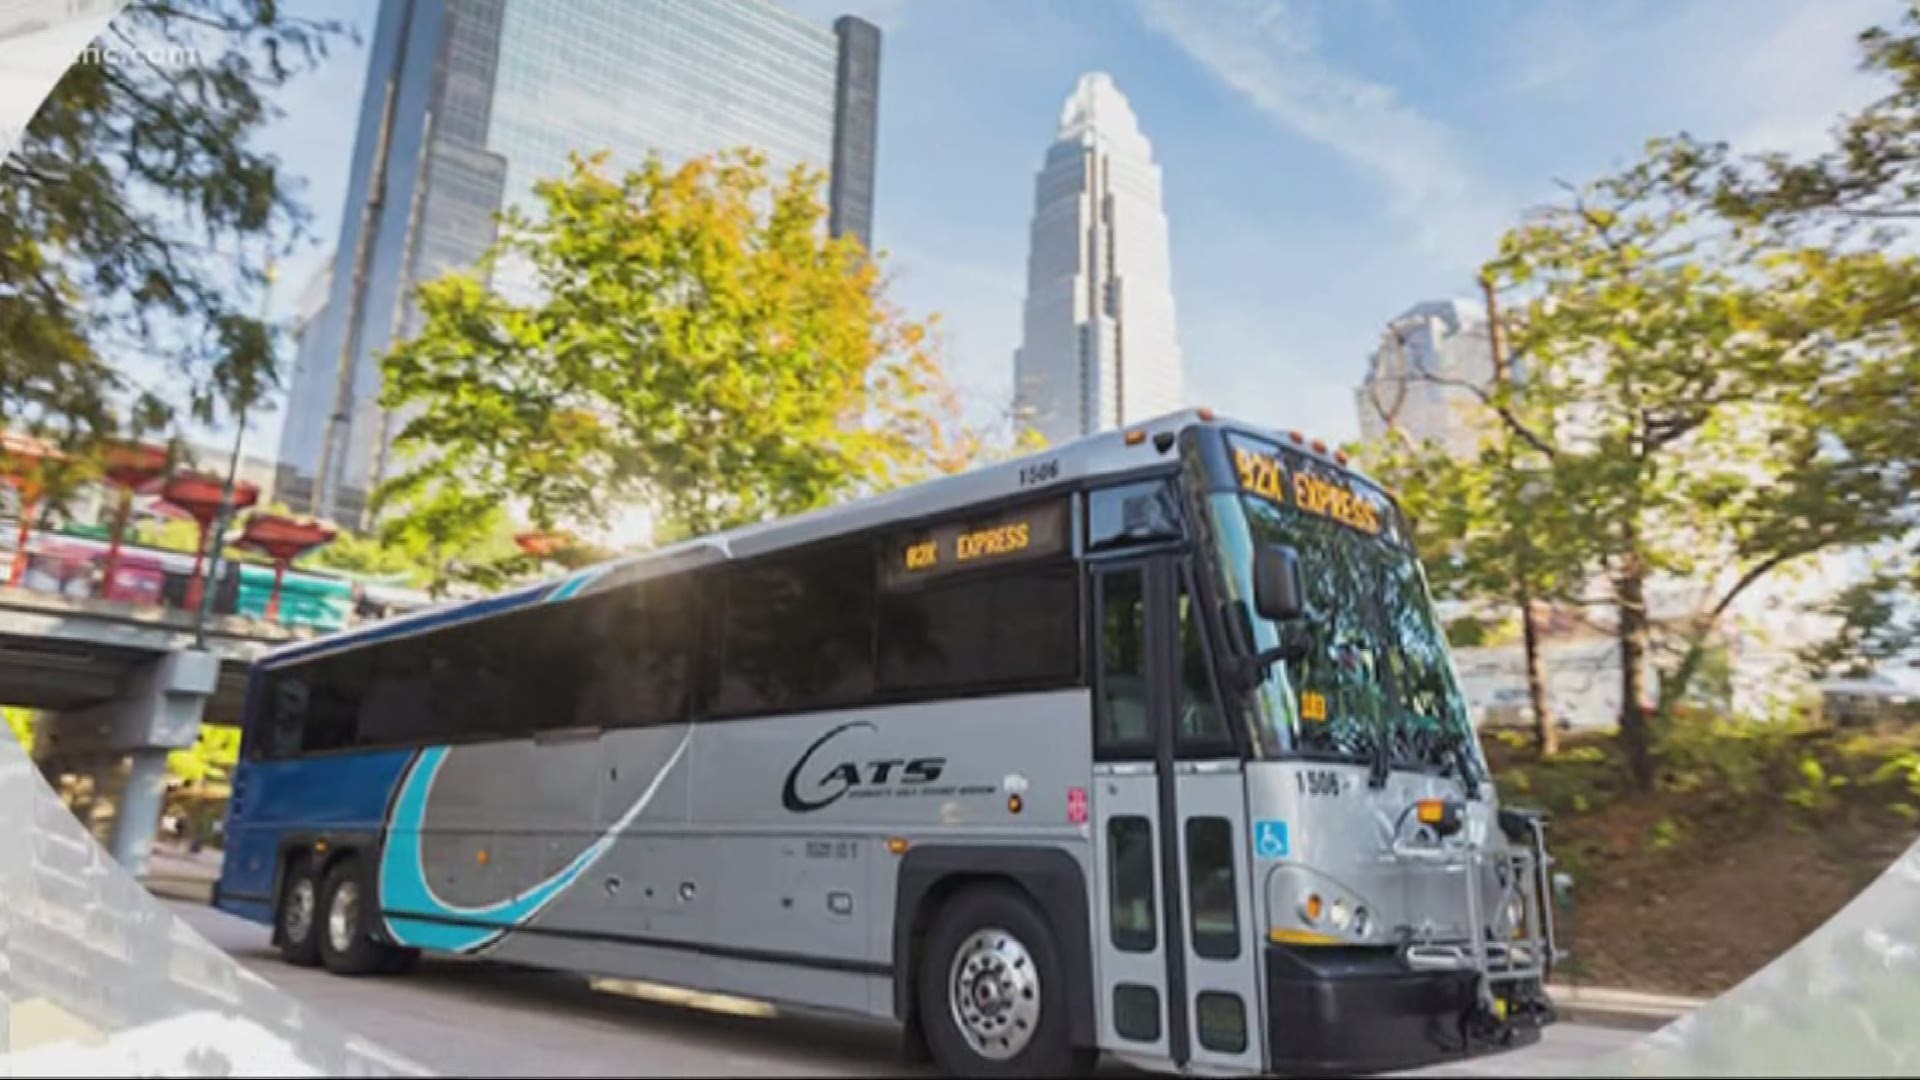 CATS says a bus transit system is the best way to connect Charlotte and Iredell county, and is expected to alleviate I-77 traffic.